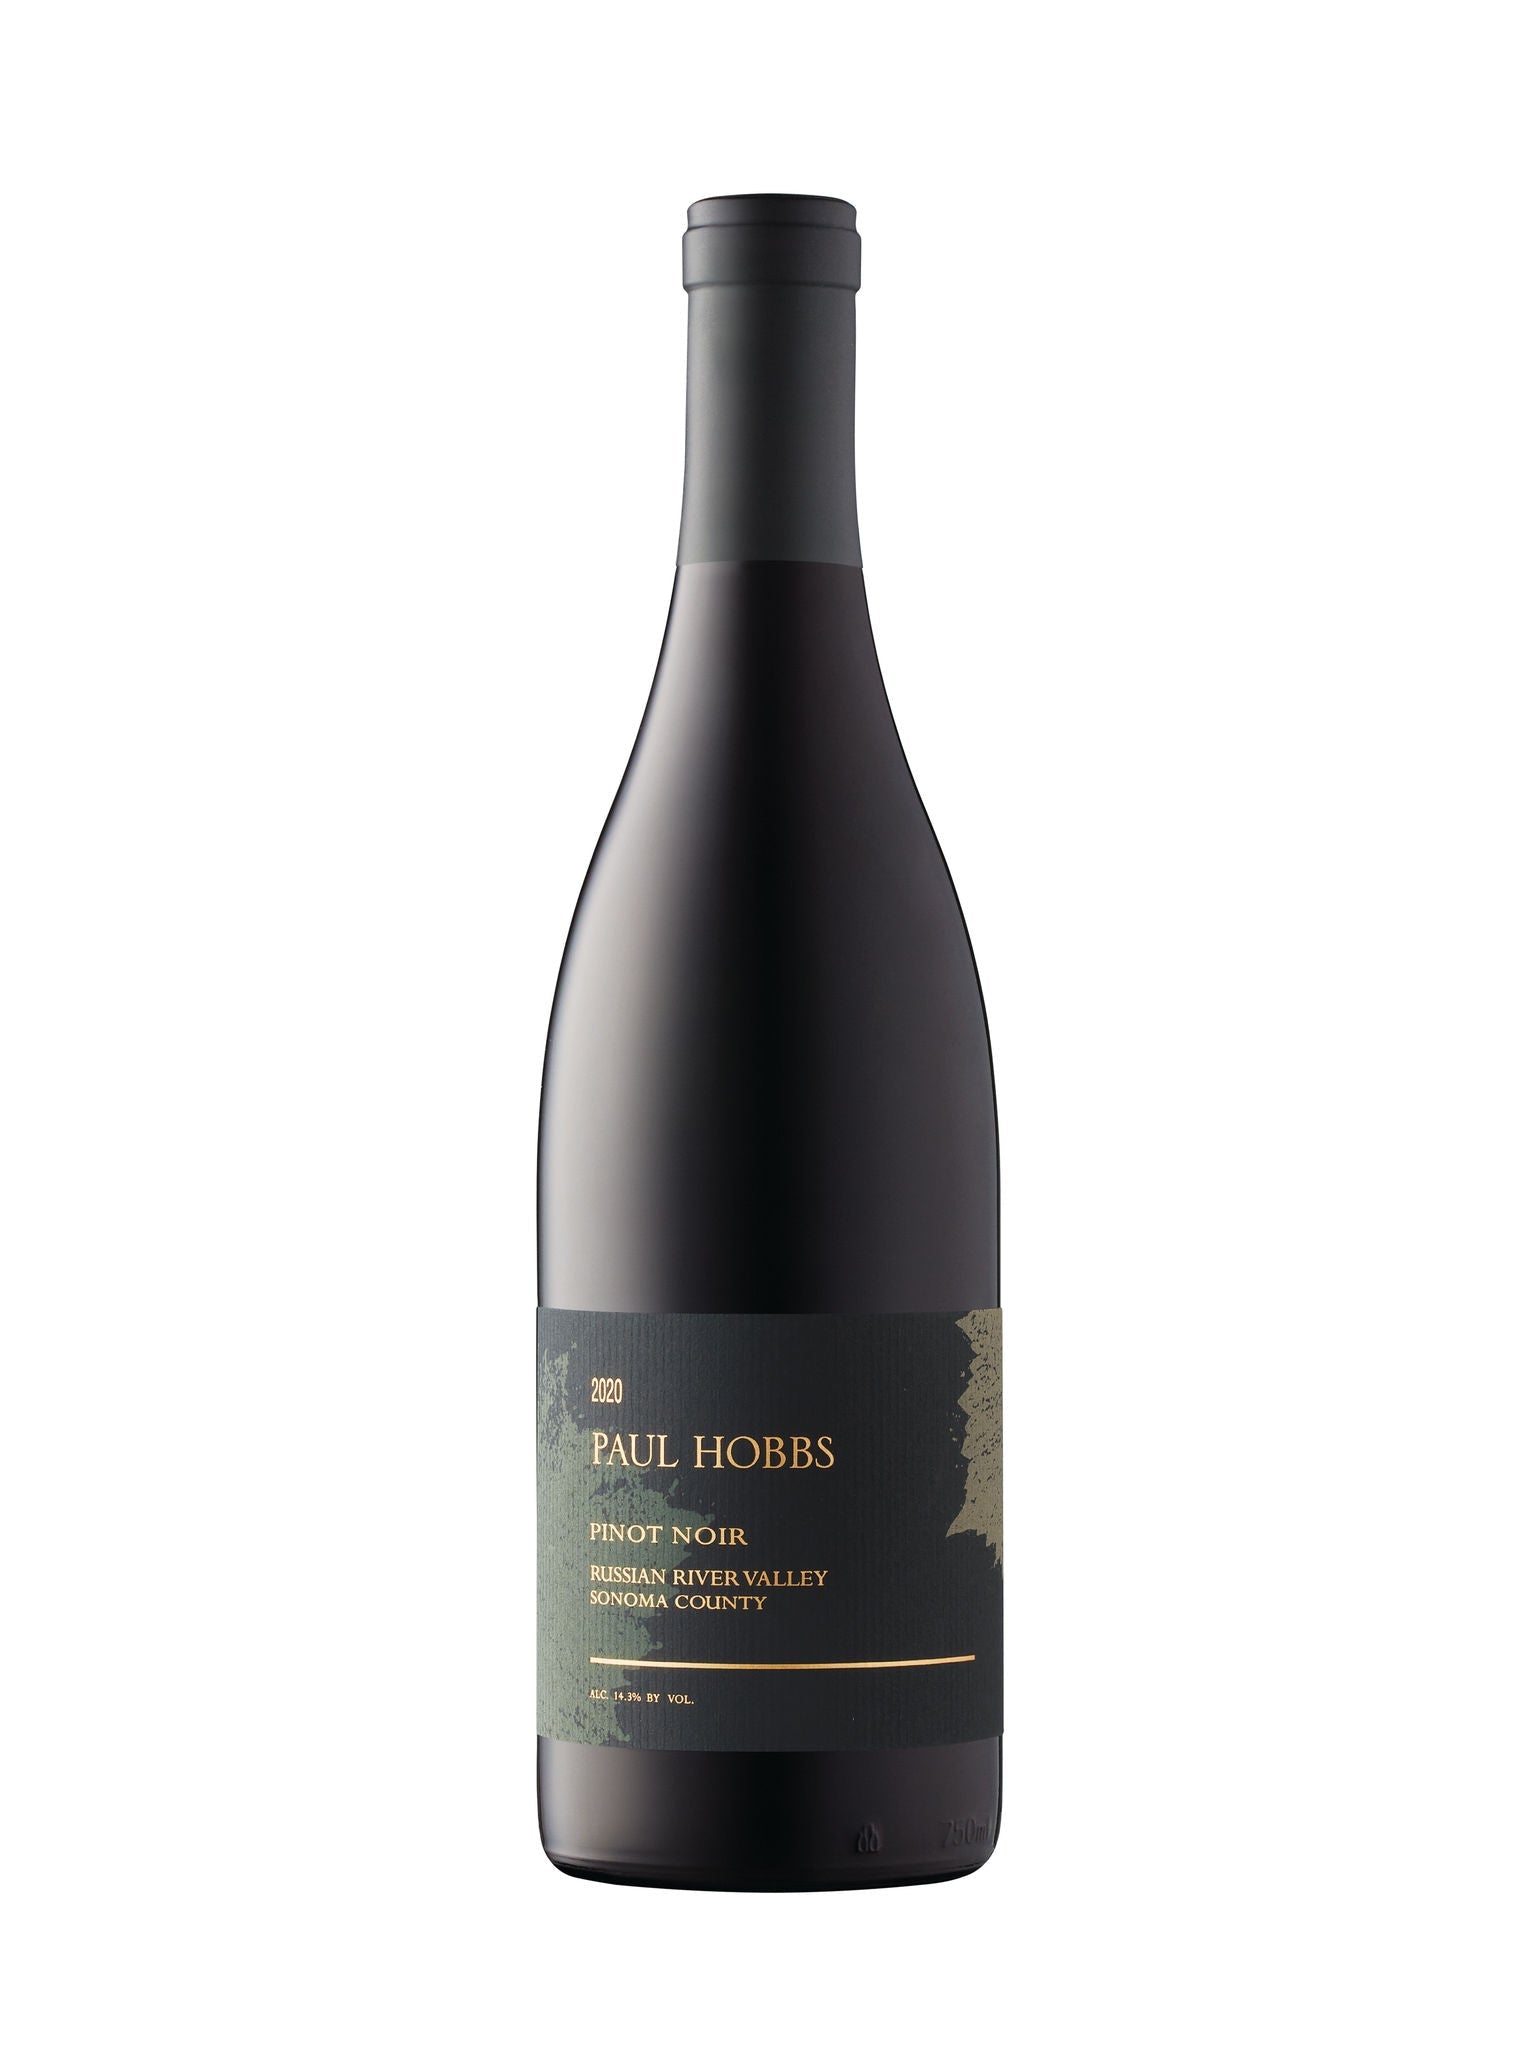 Paul Hobbs Russian River Valley Pinot Noir 2020 | Exquisite Wine & Alcohol Gift Delivery Toronto Canada | Vyno